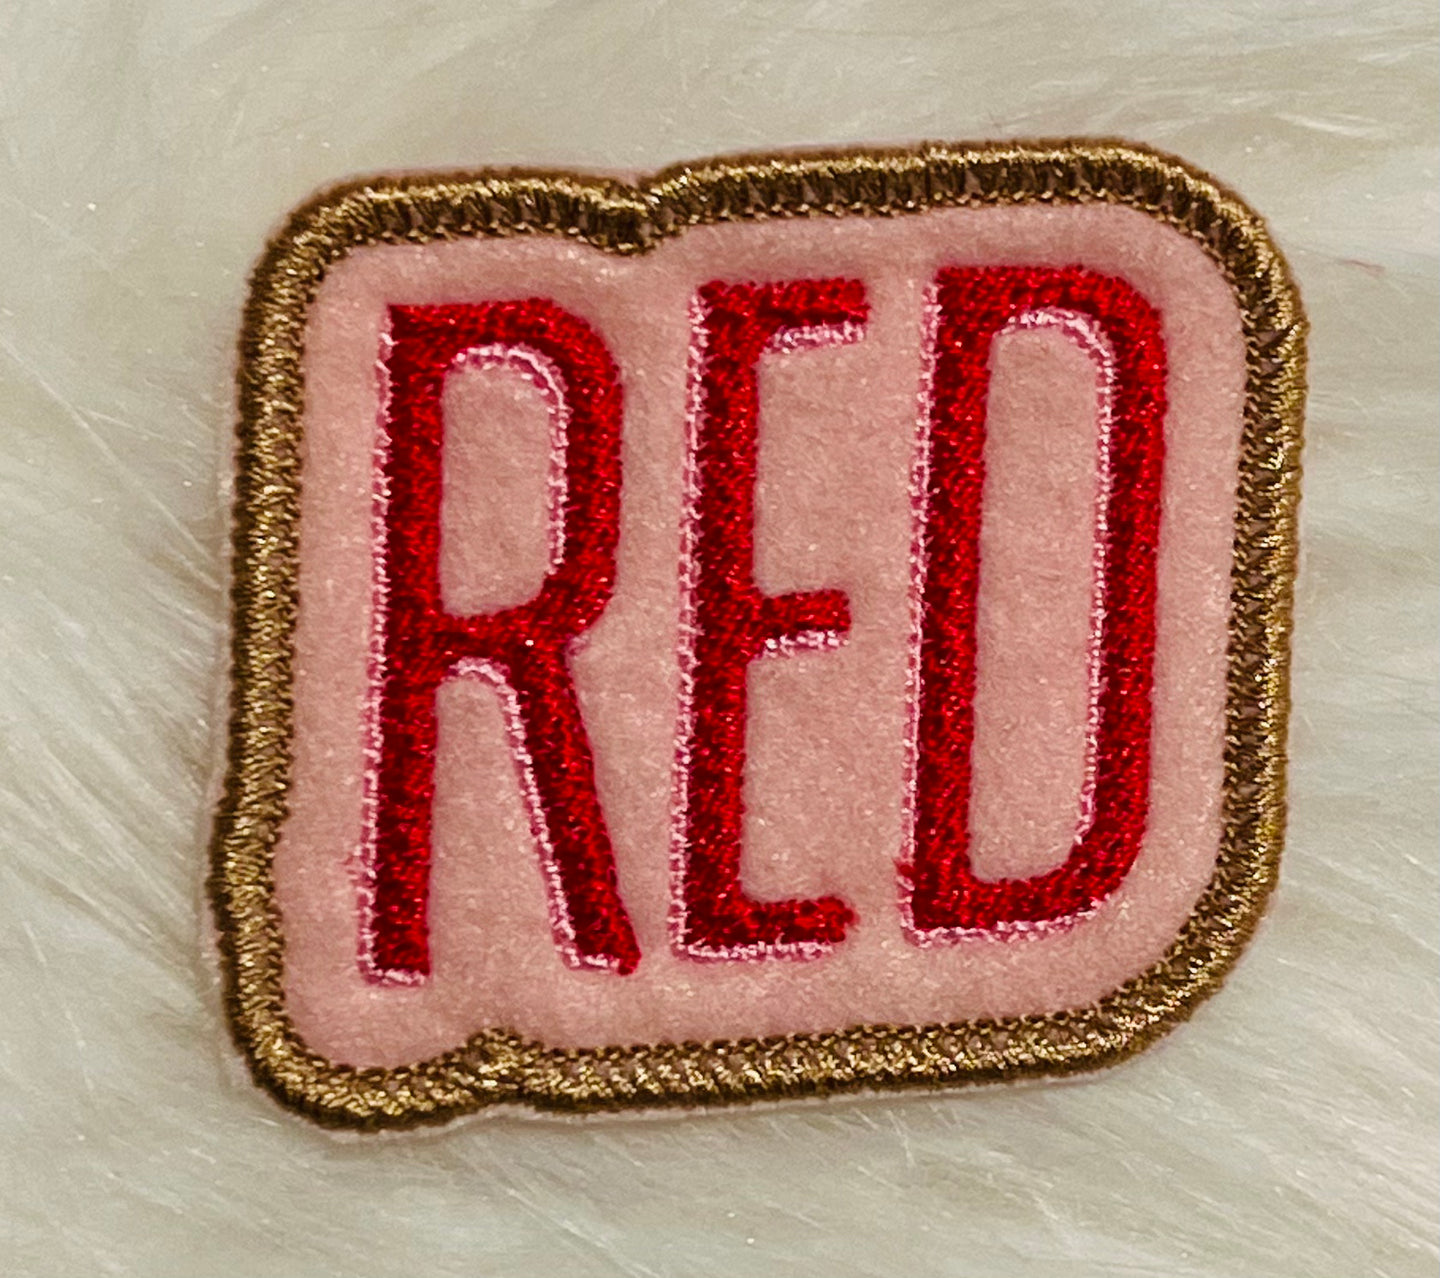 Taylor Swift Iron-on Patches 